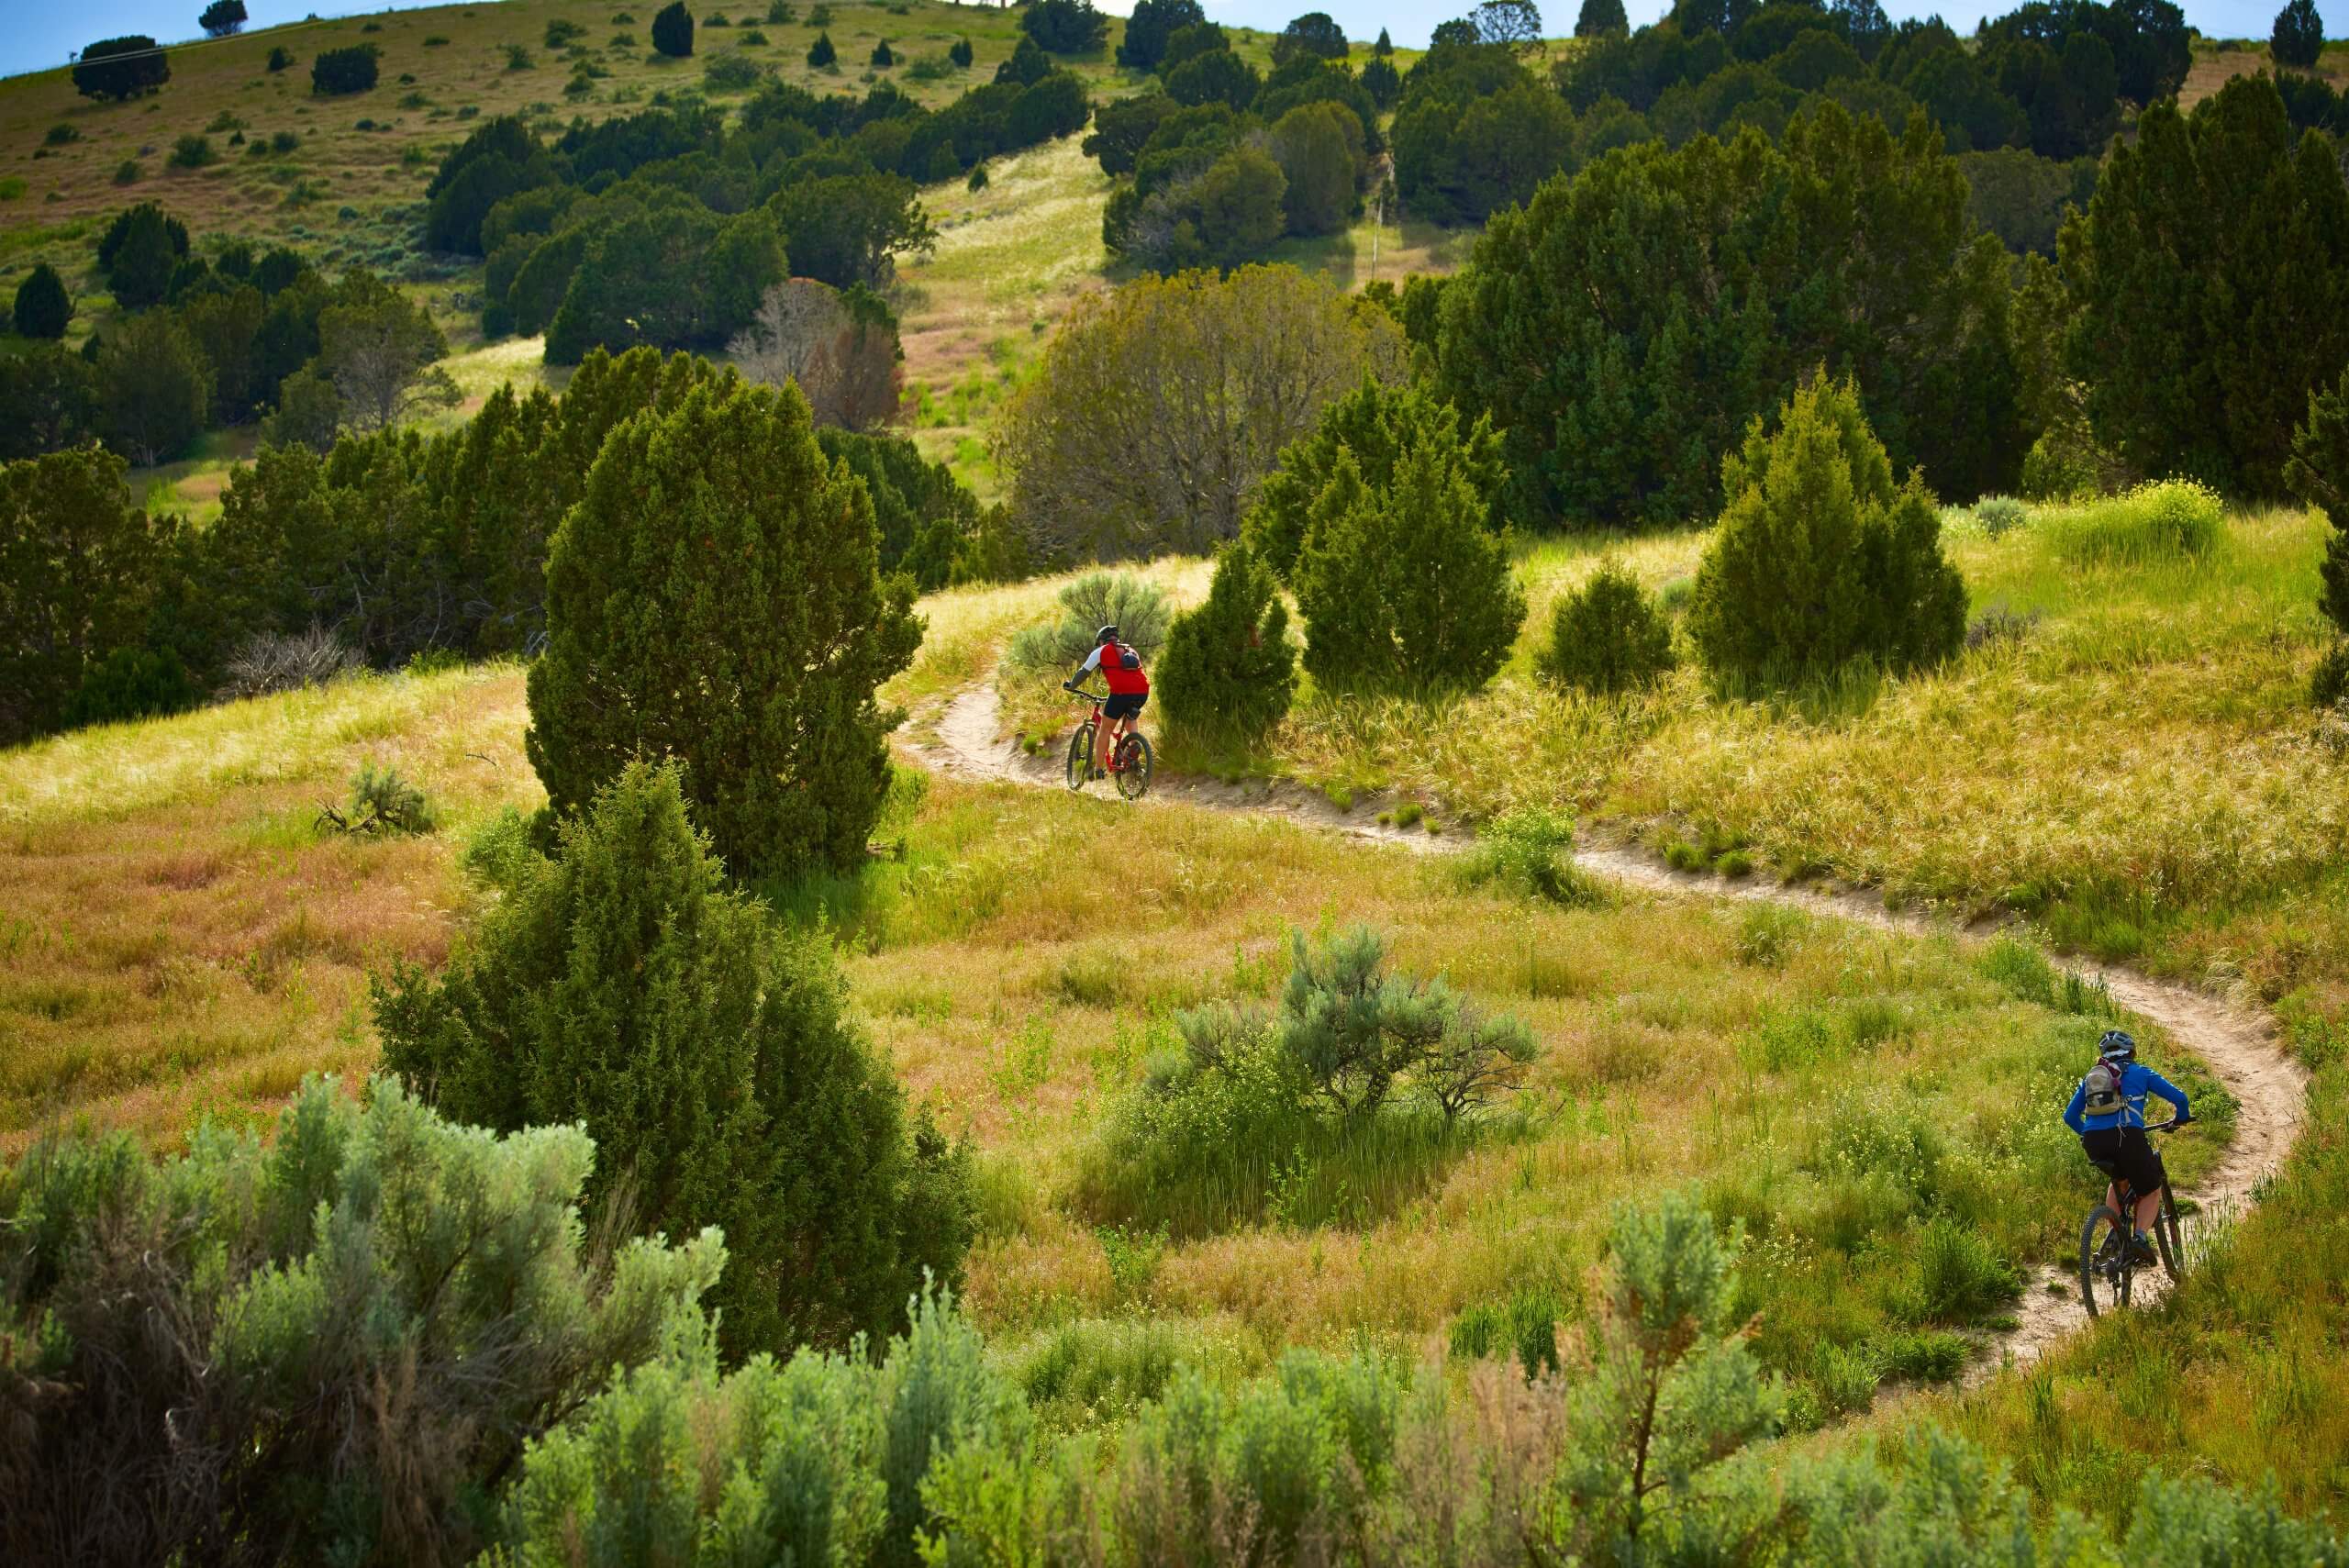 Two people riding mountain bikes along a trail surrounded by green grass and trees in the Pocatello Foothills.